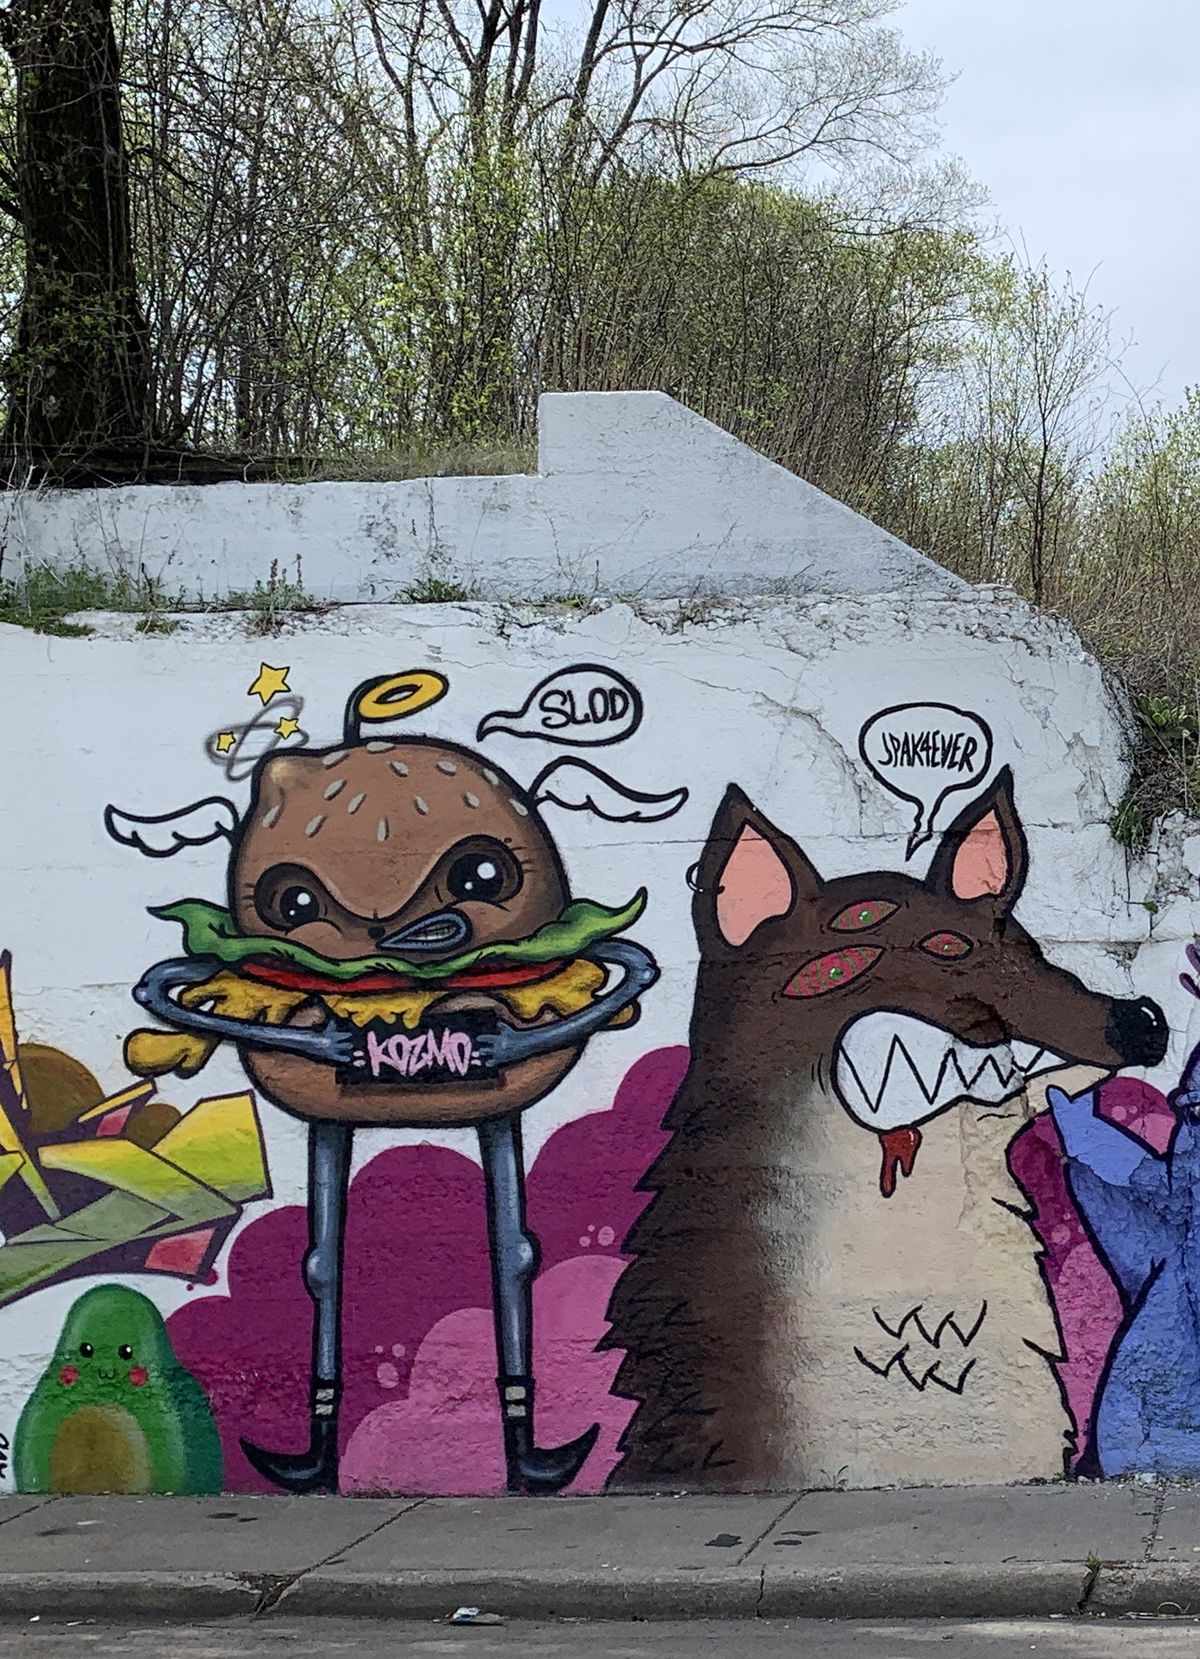 KOZMO’s burger character with arms and legs stands next to the “fox demon” of Avondale artist Jeff Pak — who goes by JPAK4EVER. The “fox demon” was inspired by a manga that Pak read called “Chainsaw Man.”